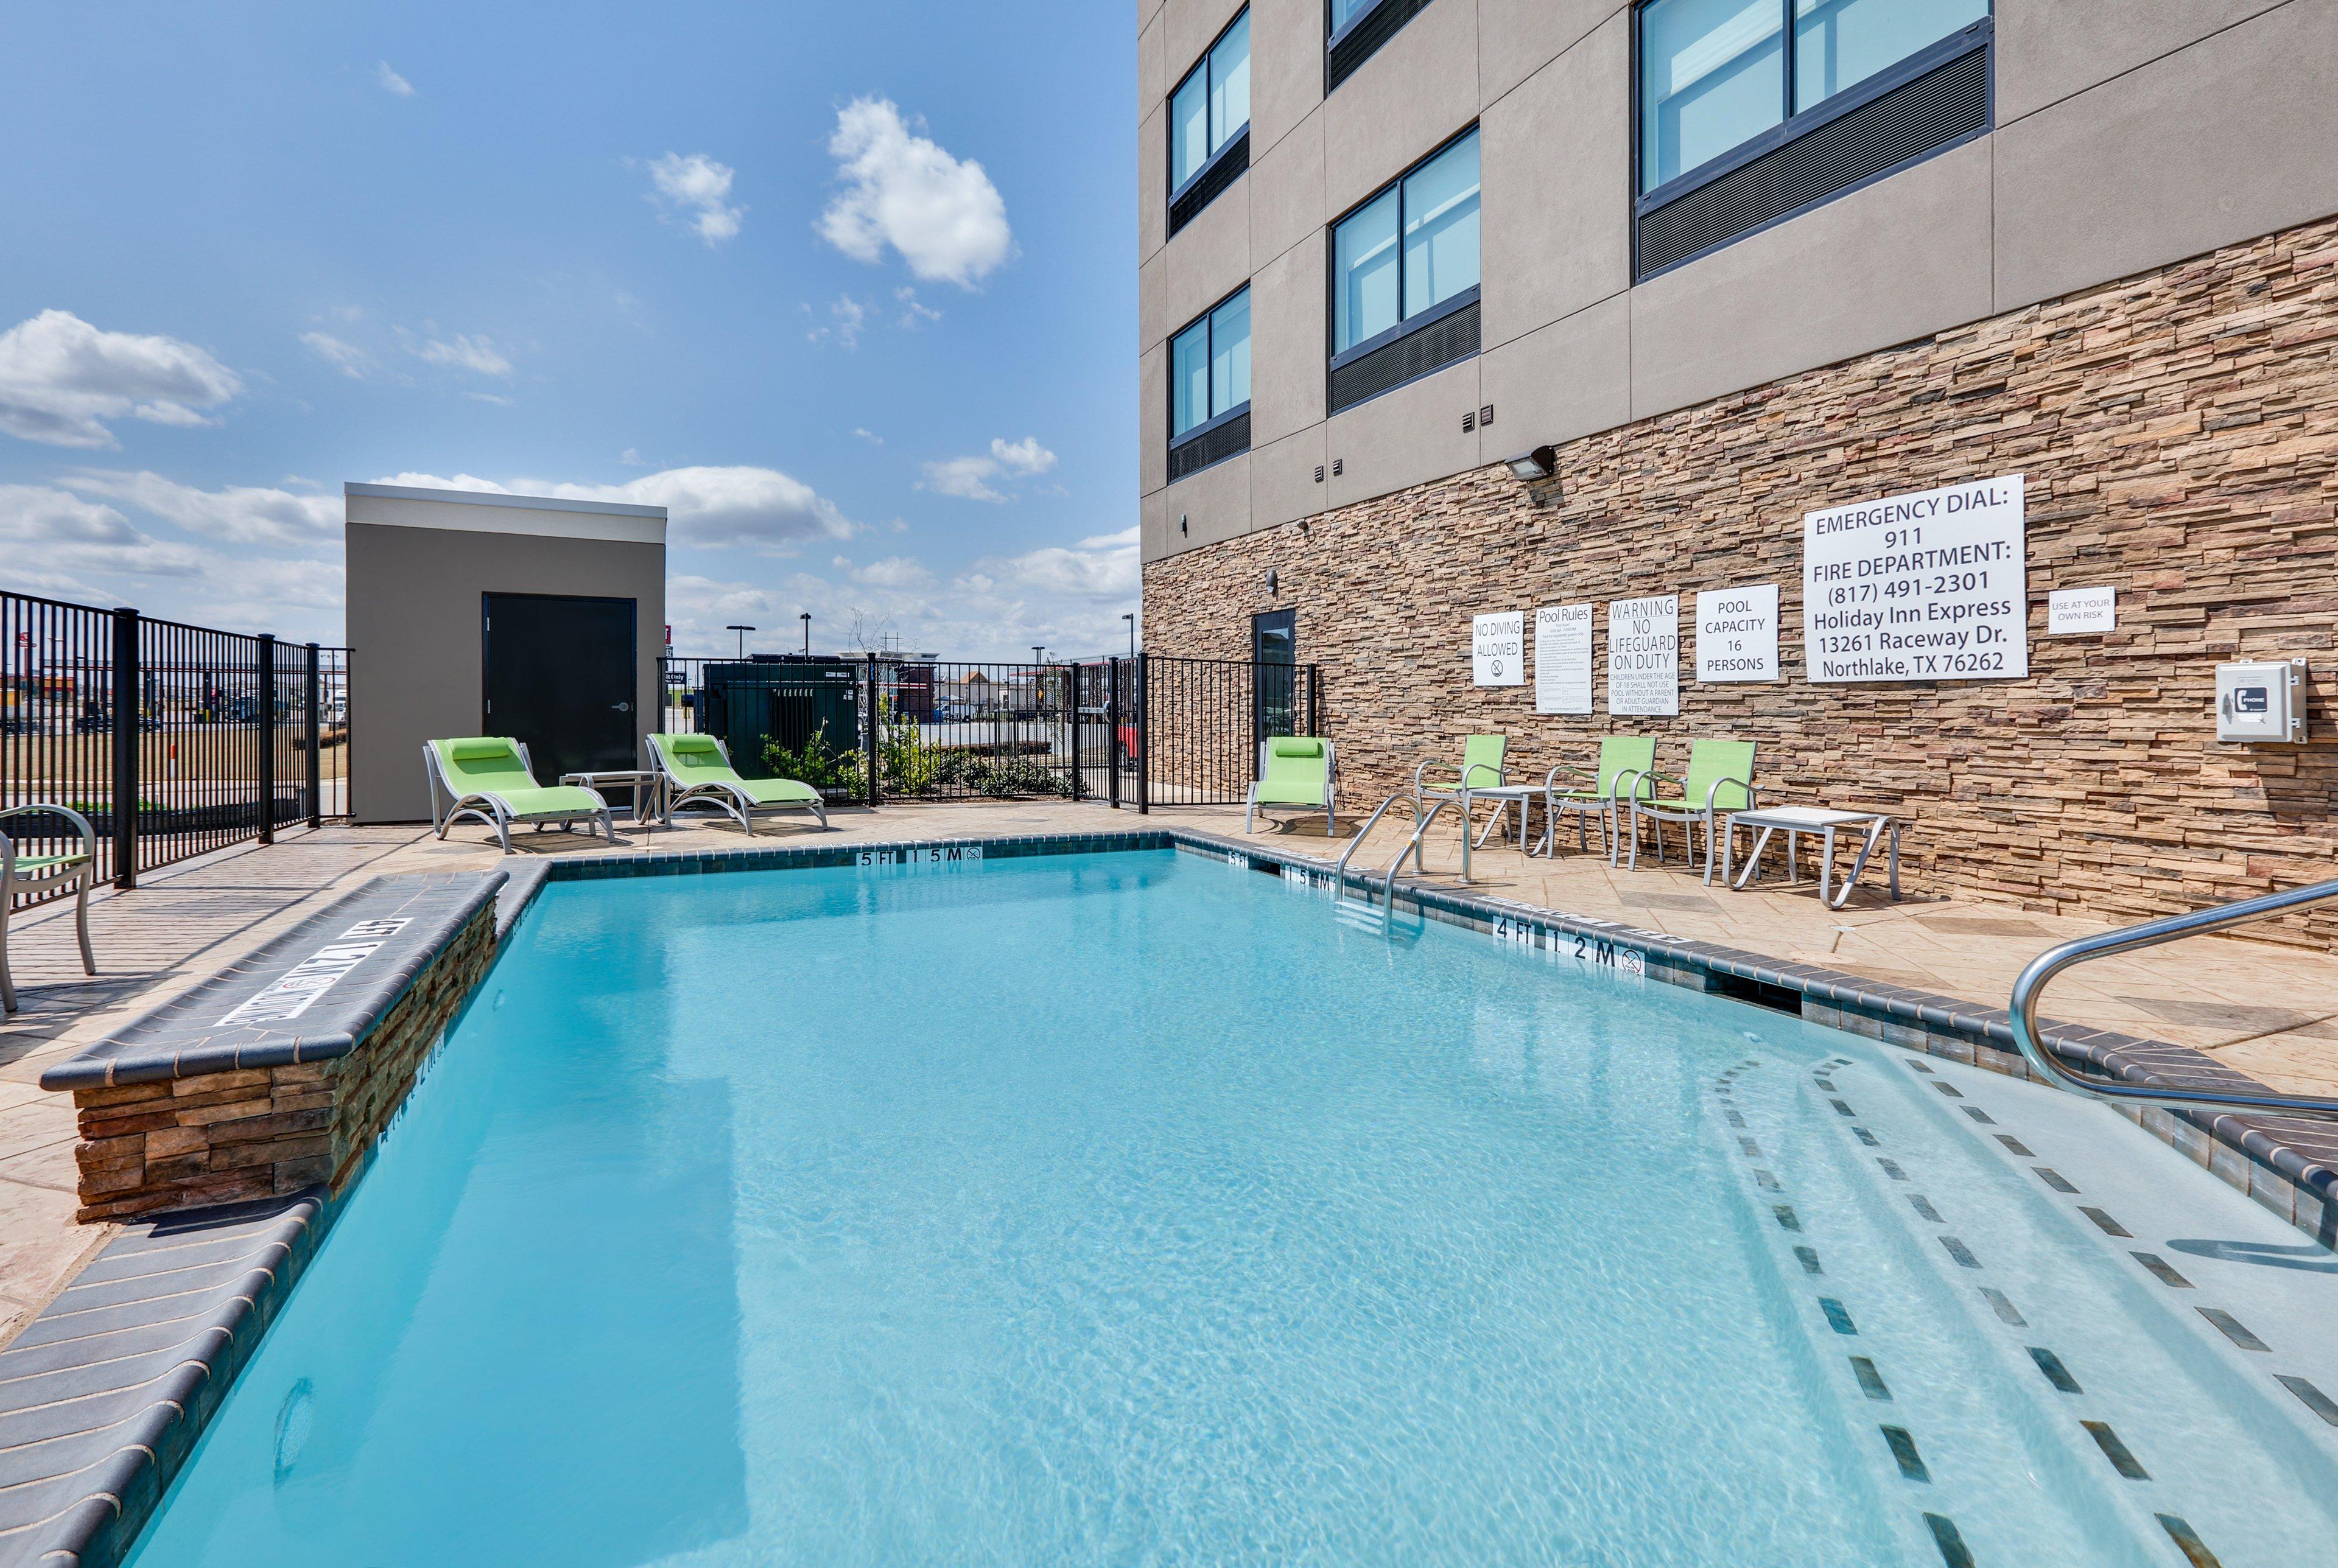 Home2 Suites by Hilton Fort Worth Northlake image